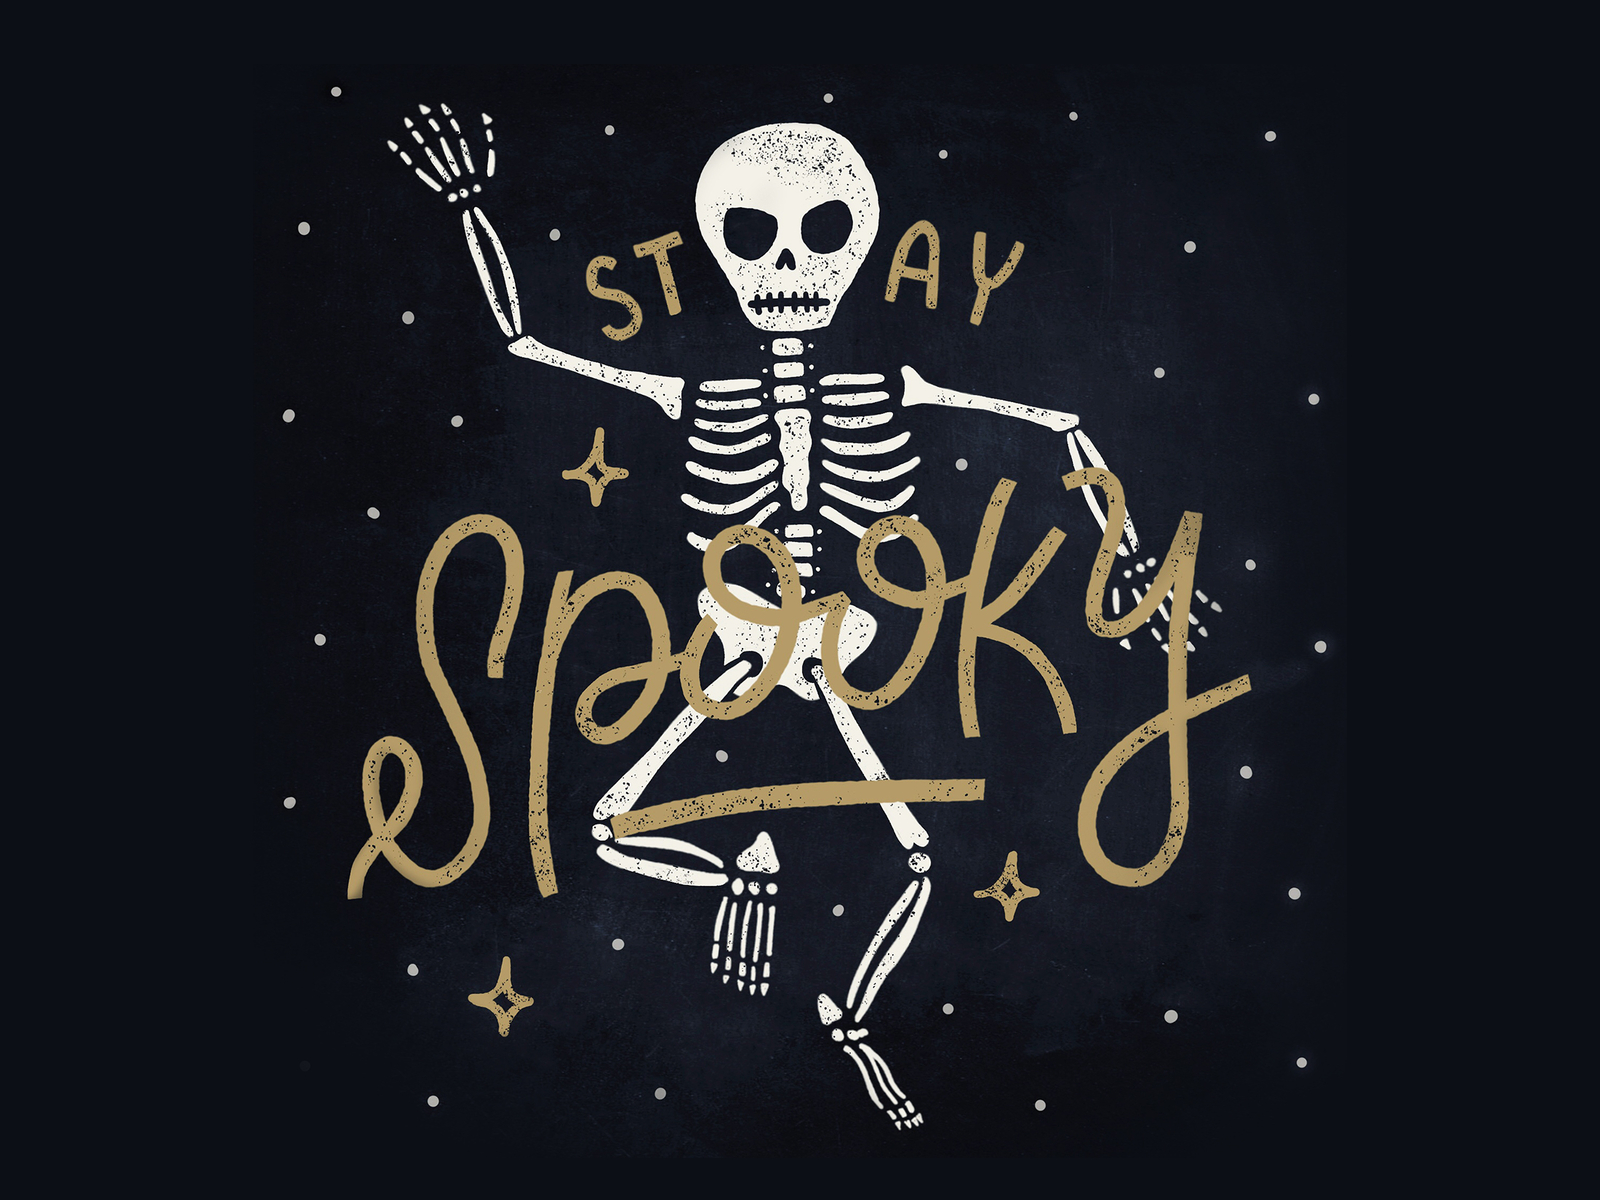 Stay Spooky by Erin Druger on Dribbble